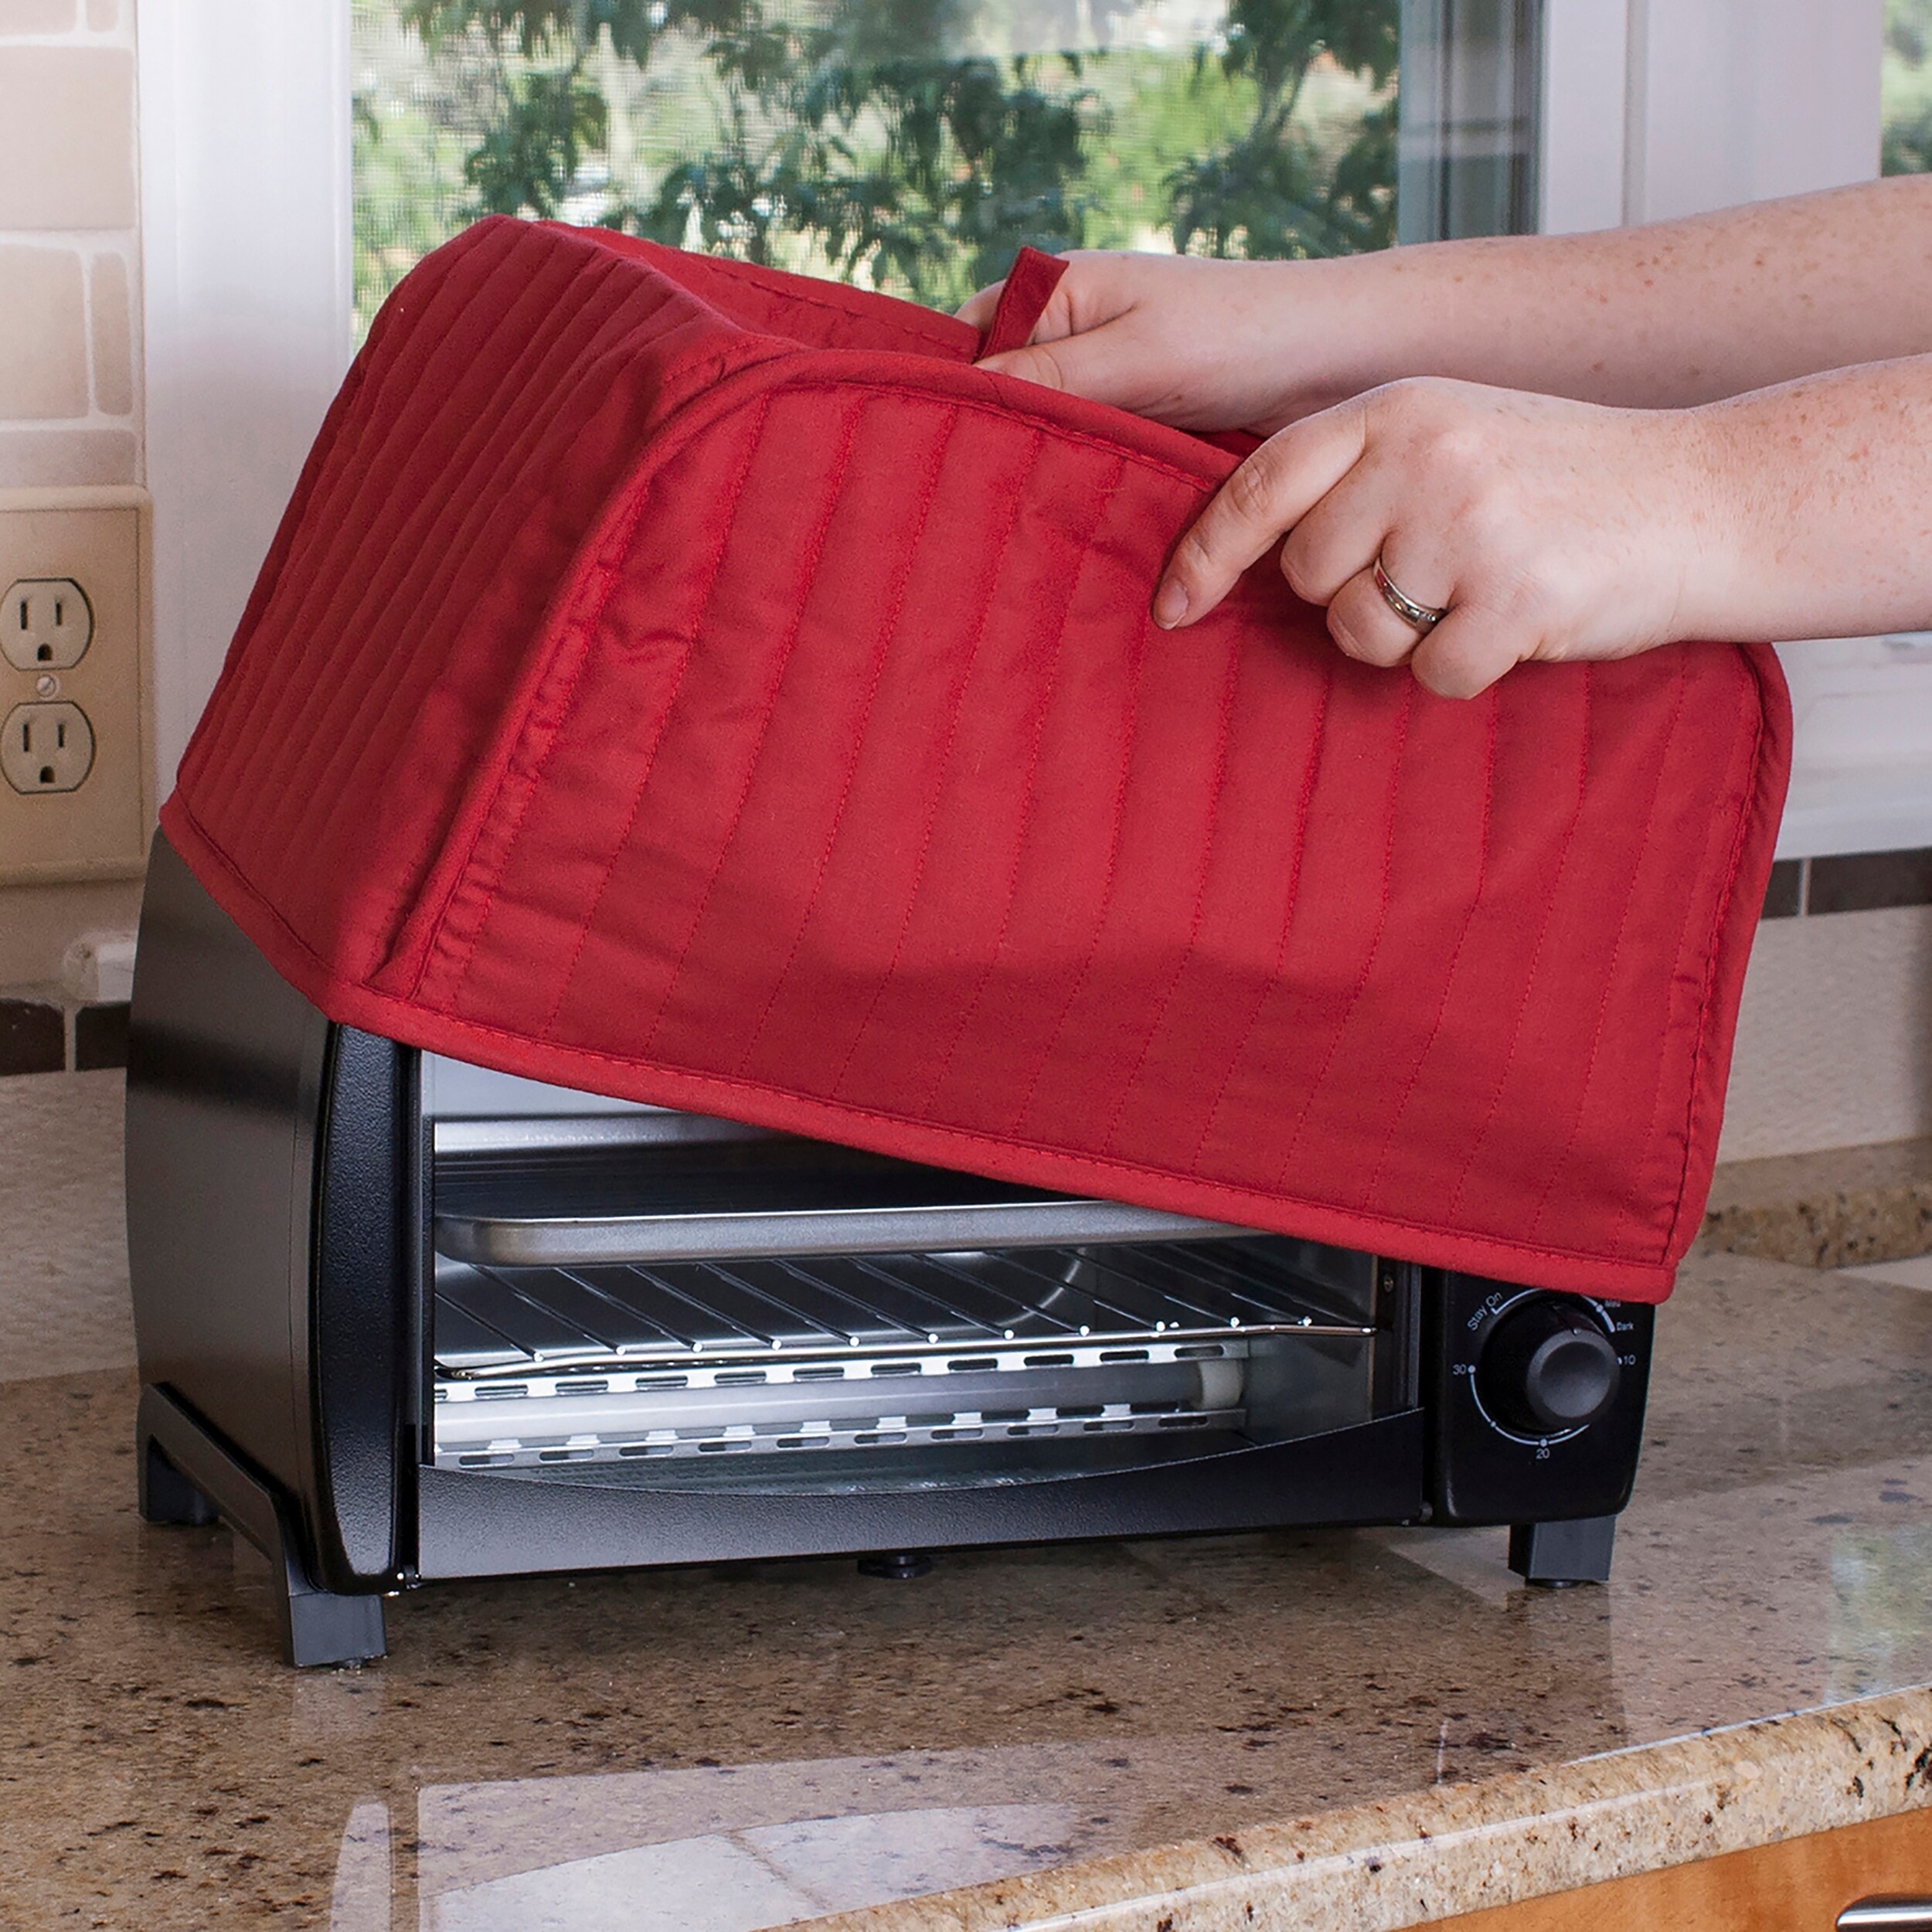 Solid Paprika Toaster Oven/Broiler Cover, Appliance Not Included